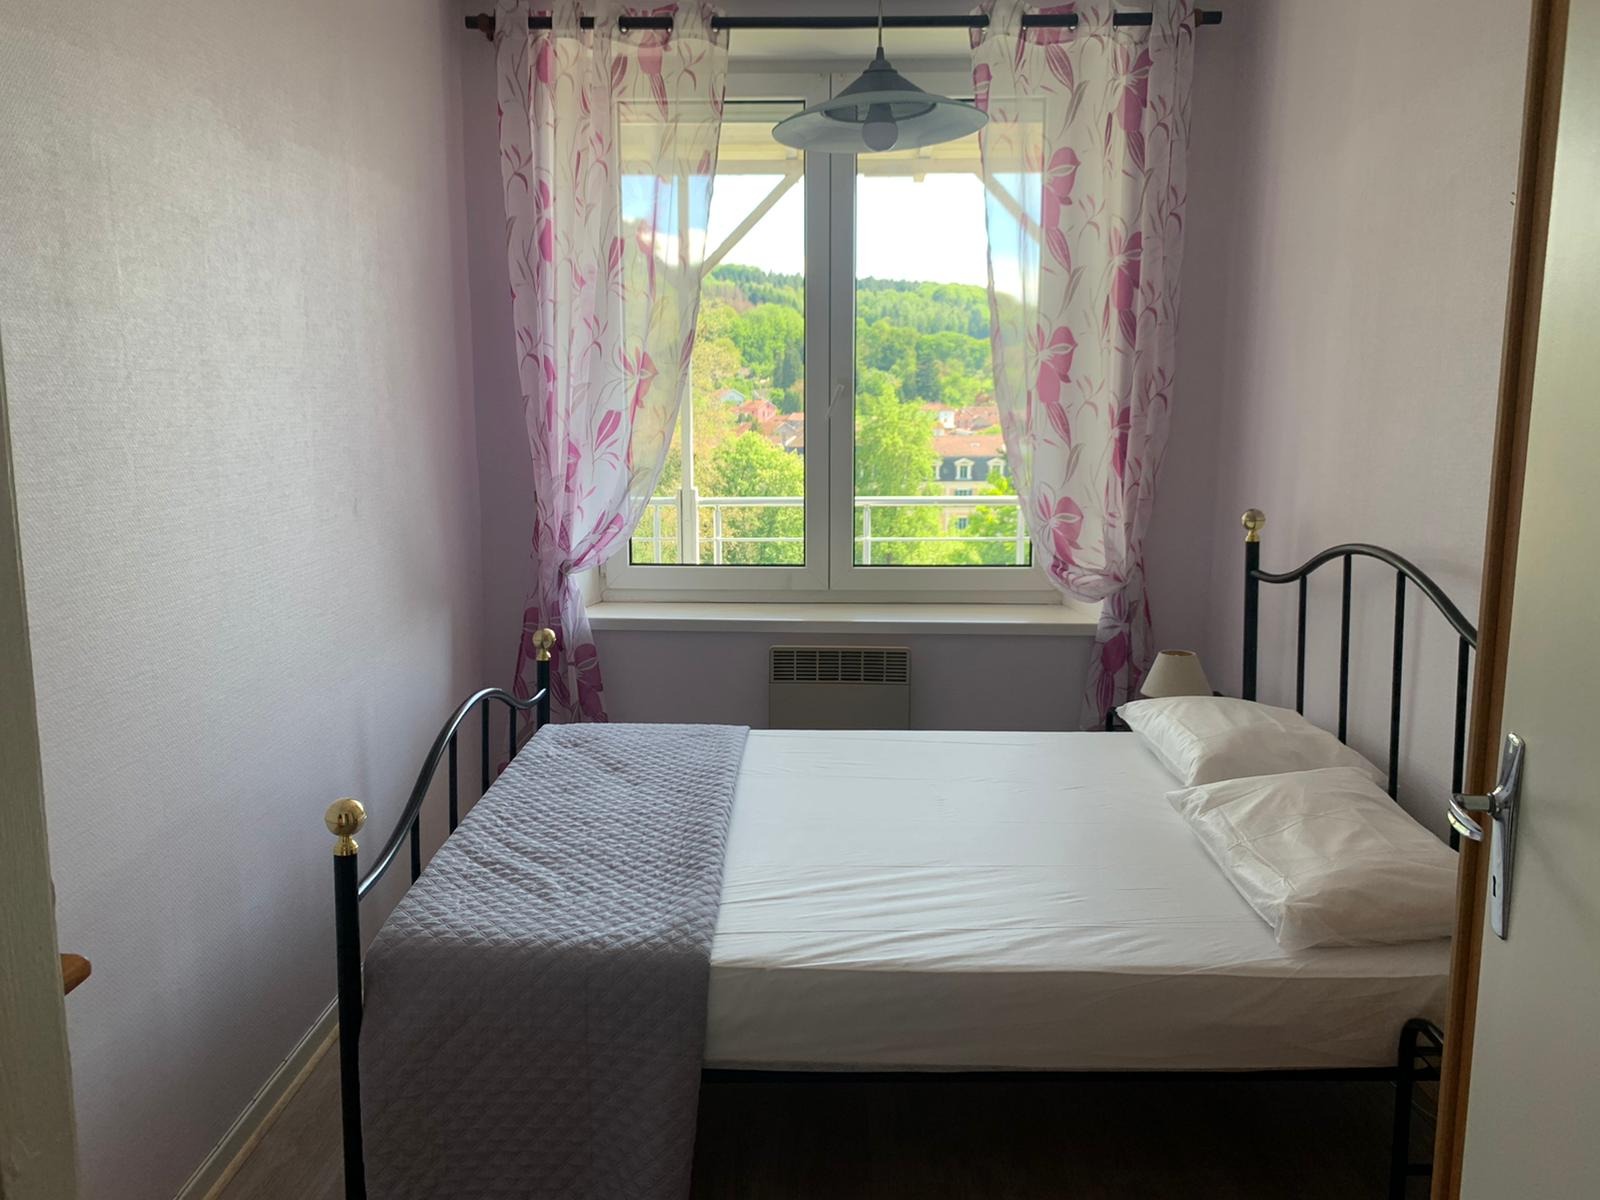 Location cure thermale Bains-les-bains